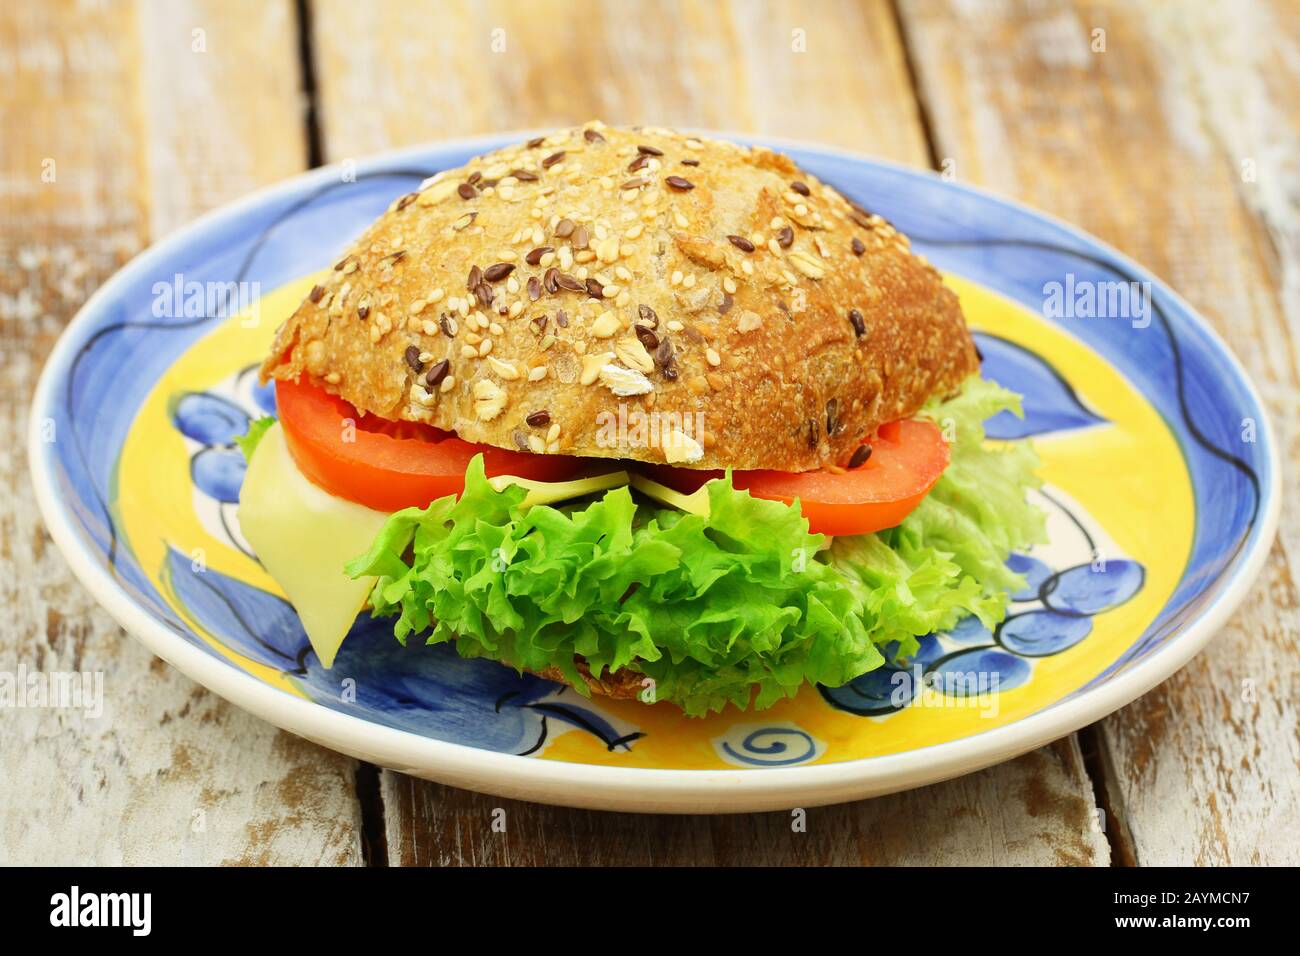 Mixed grain roll with cheese, lettuce and tomato on vintage plate, closeup Stock Photo